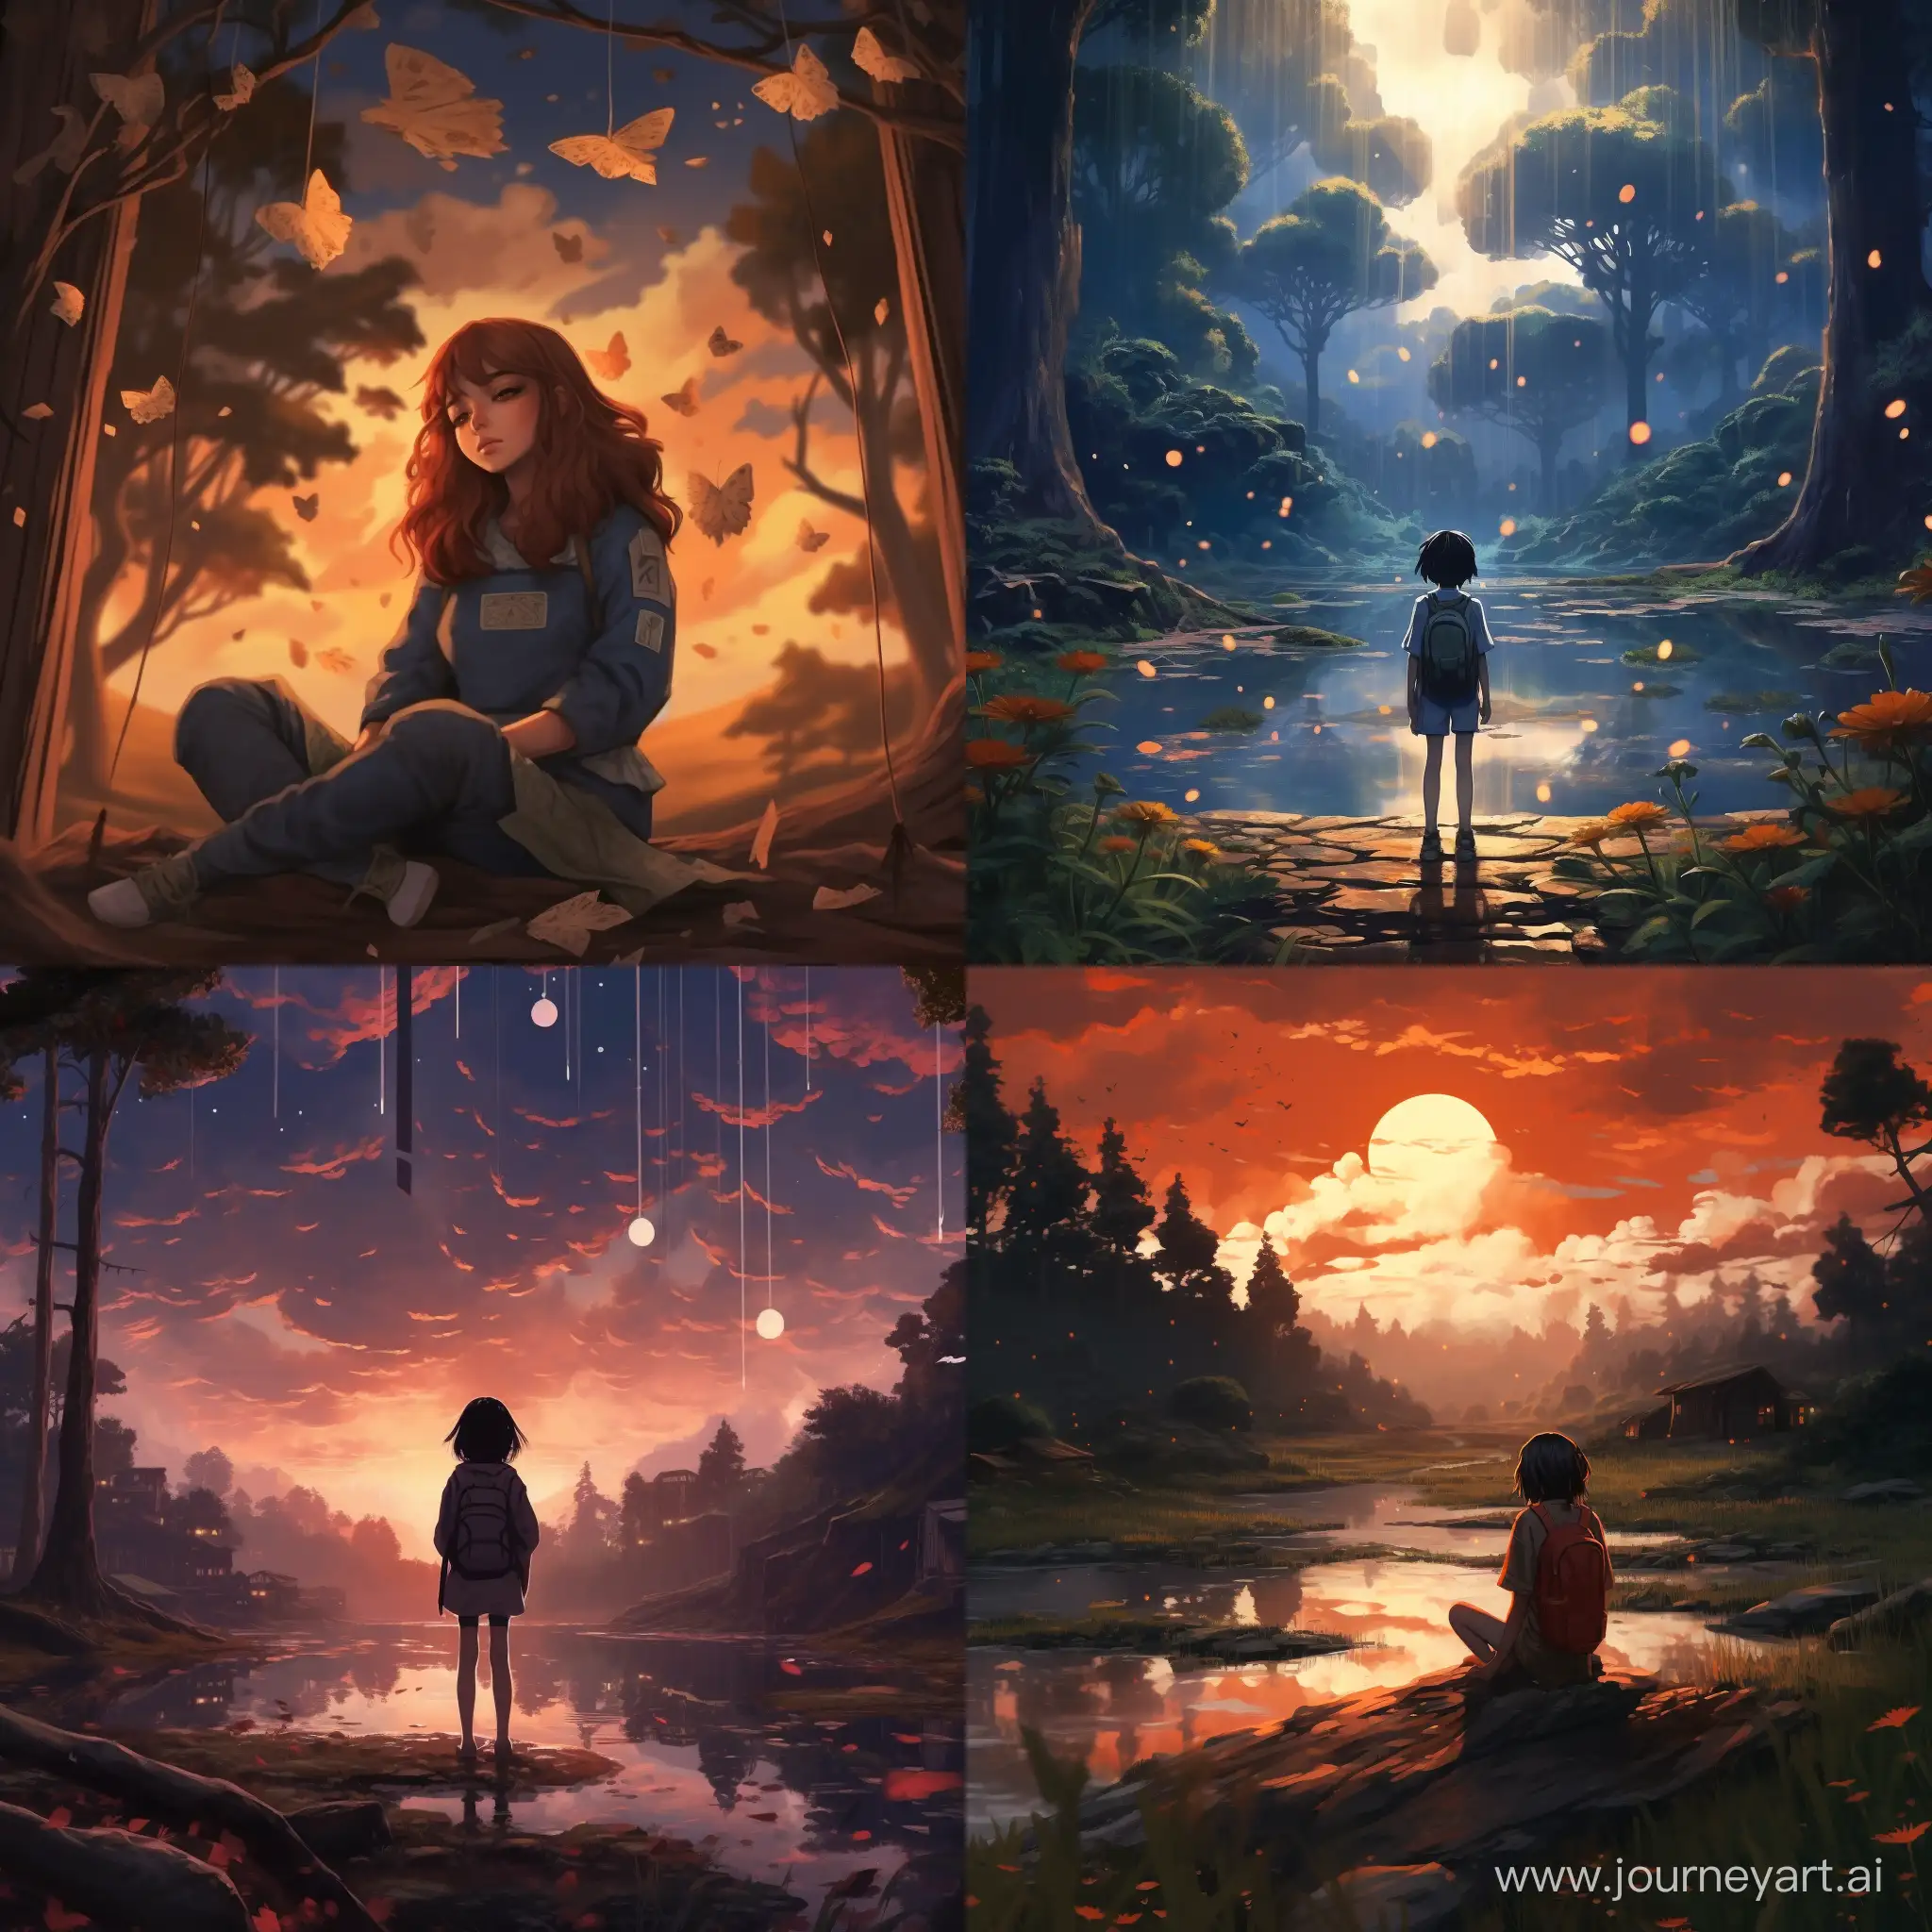 A beautiful scene with a person in the center in anime or ghilbli style that resembles the theme of nostalgia and melancholy, with the title 'Lost Dreams' written and blended with the image. The artwork should be inspired by the trending artworks on artstation.